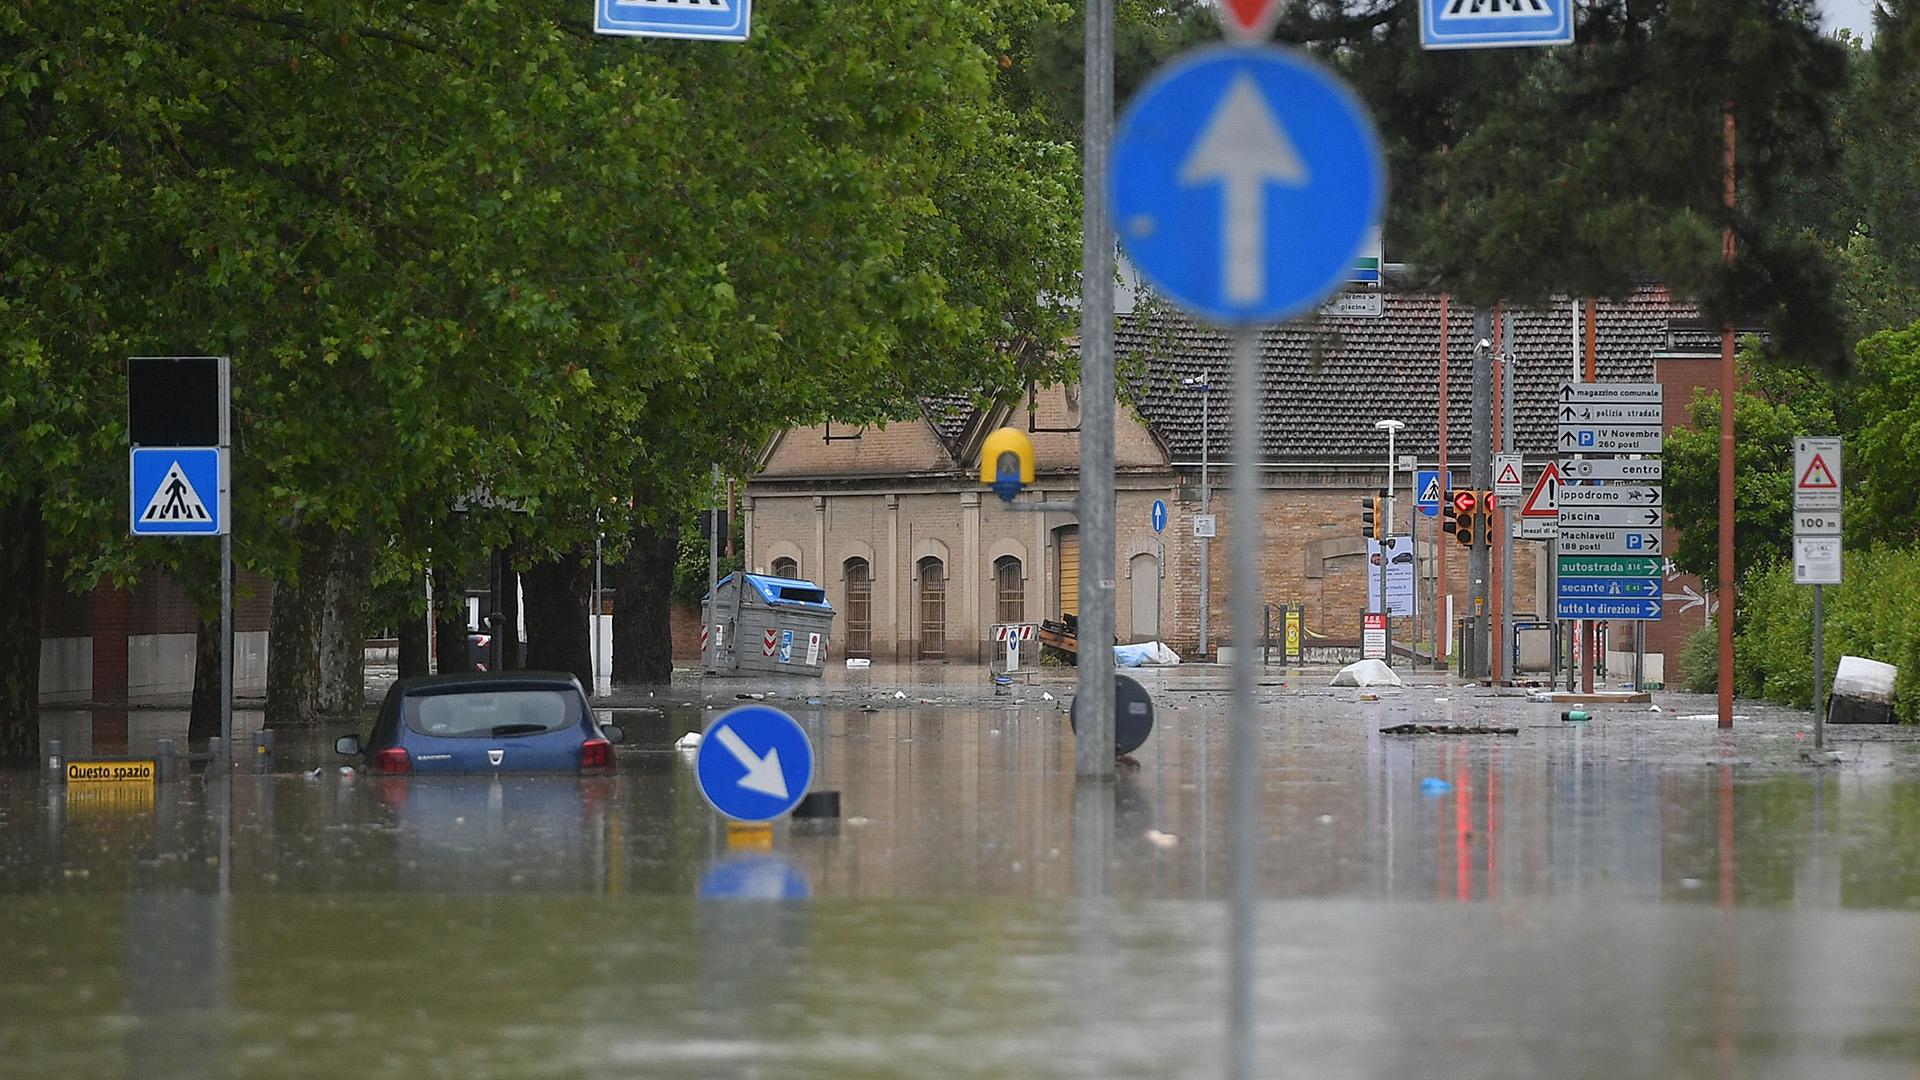 A flooded street is pictured in Cesena on May 17, 2023 after heavy rains caused major floodings in central Italy. Trains were stopped and schools were closed in many towns while people were asked to leave the ground floors of their homes and to avoid going out, and five people have died after the floodings across Italy's northern Emilia Romagna region.